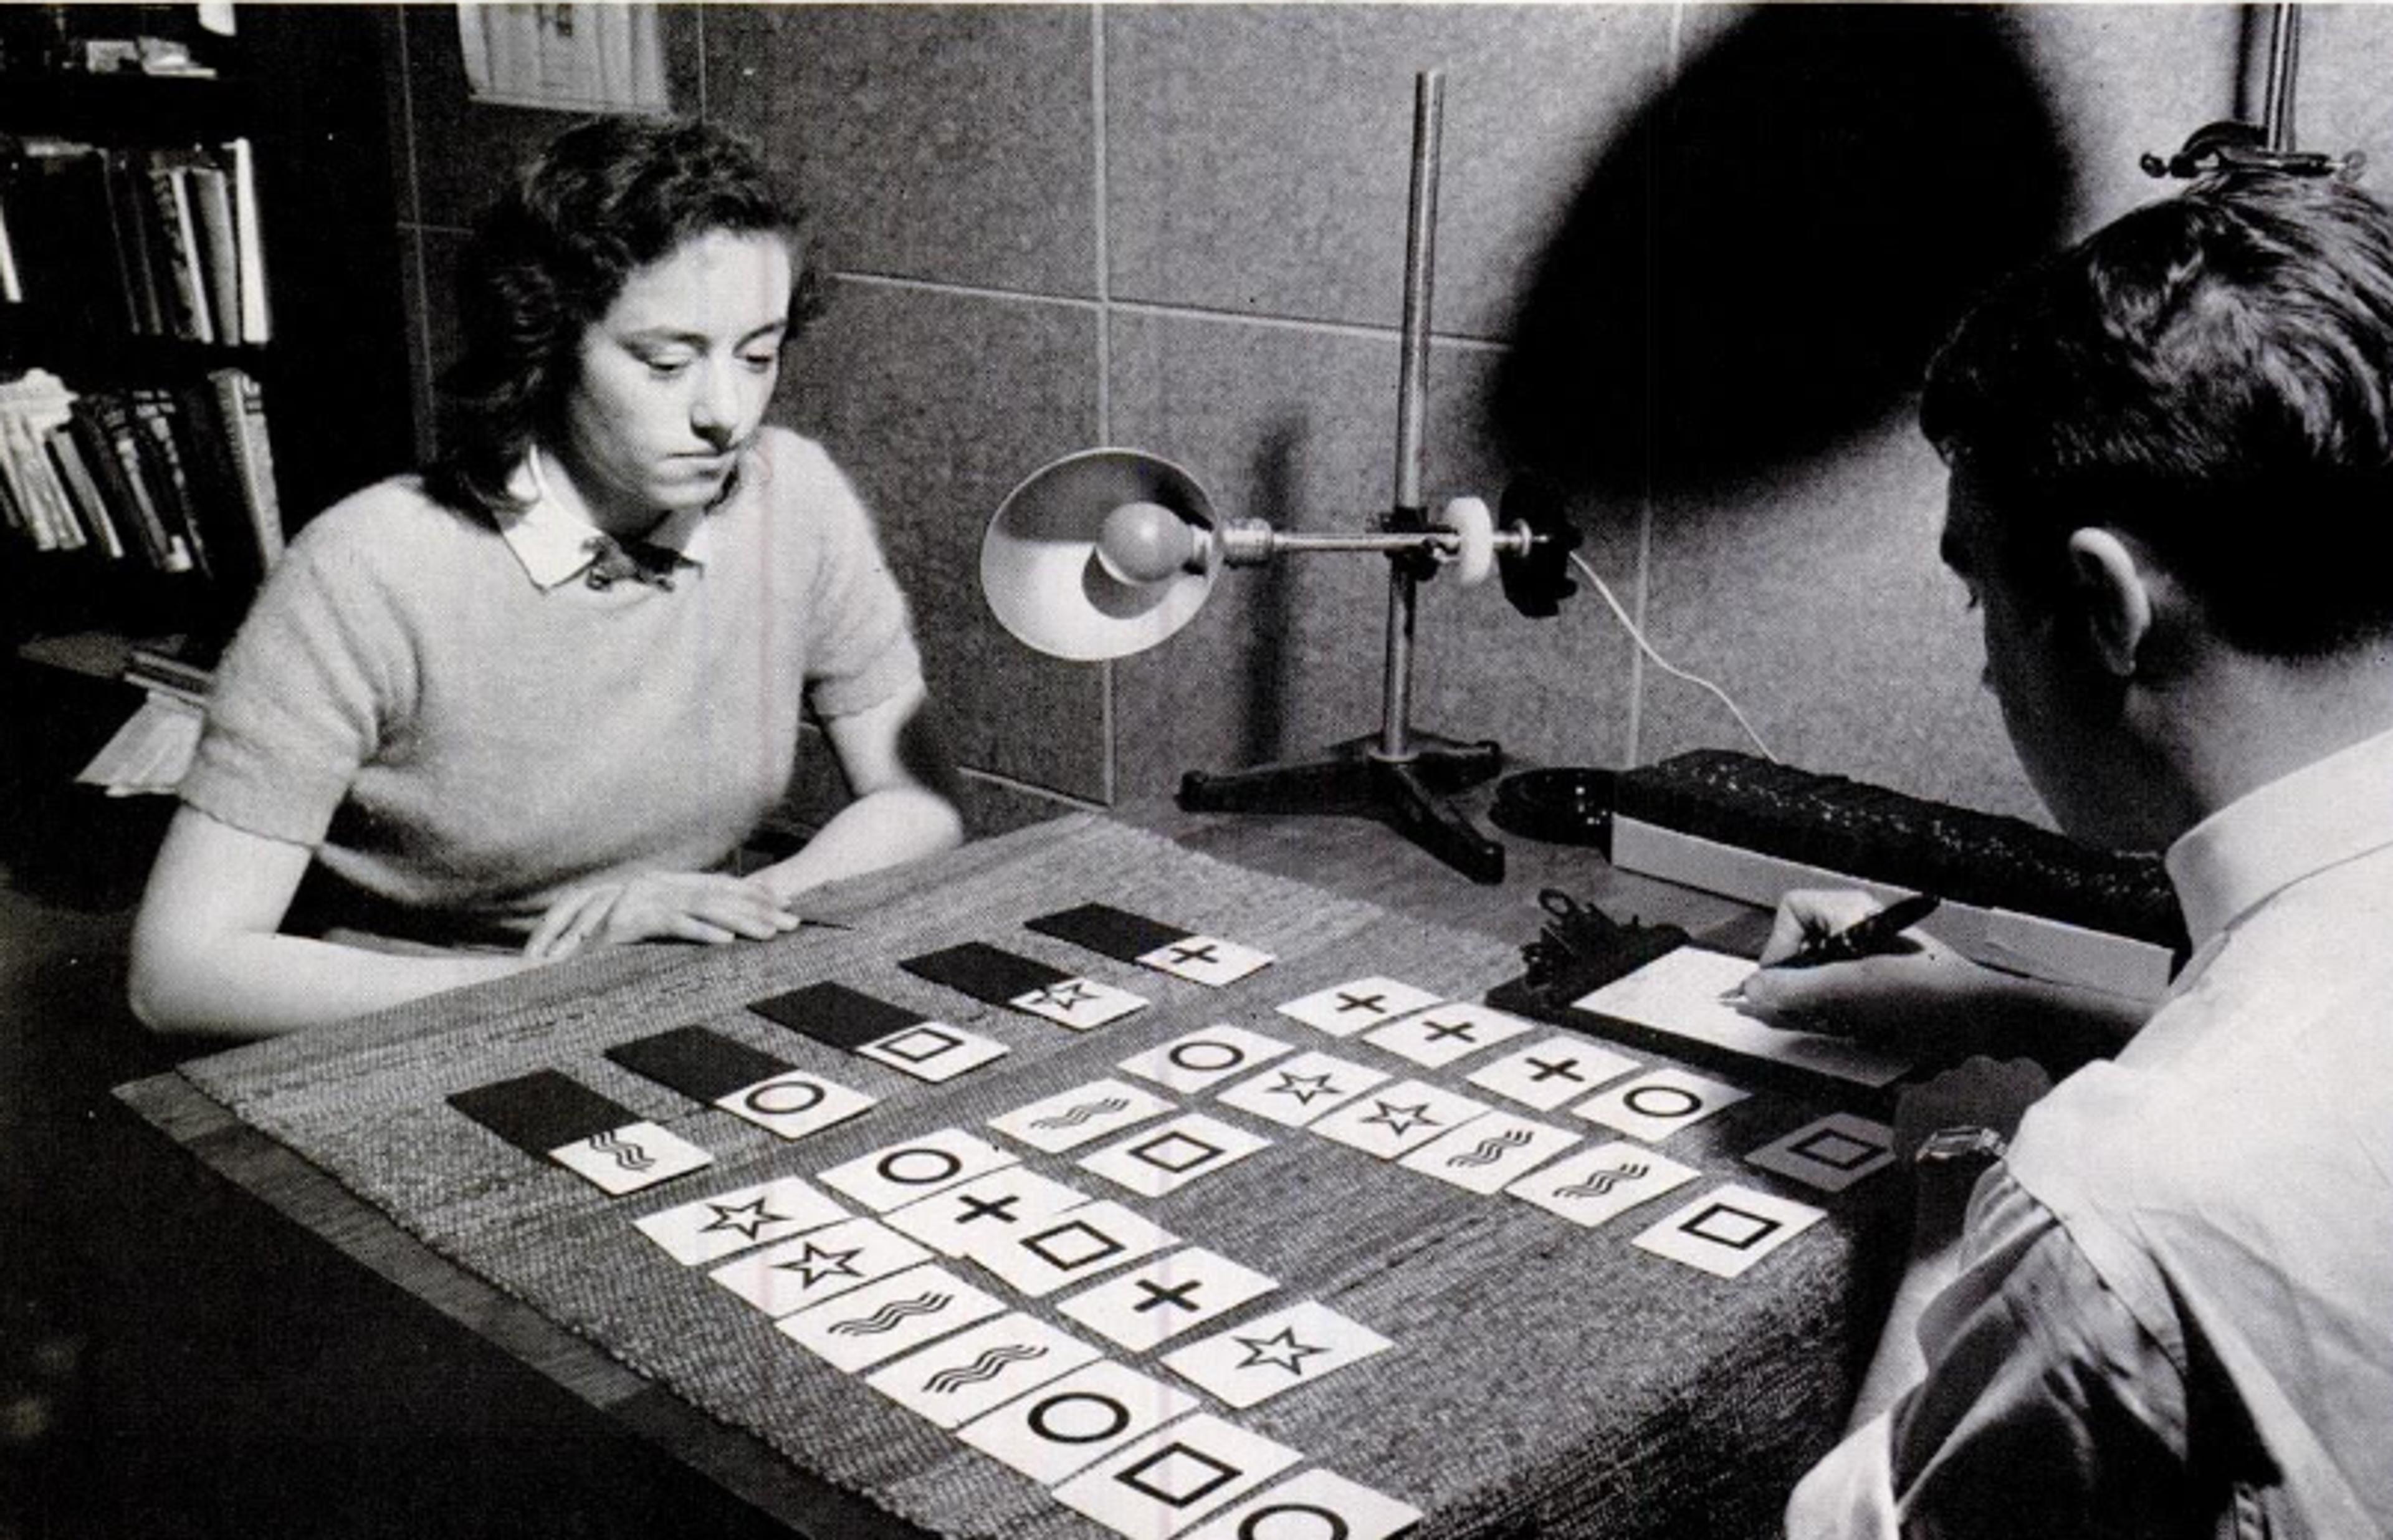 A woman and a man sit across from each other at a table, with cards displaying shapes and symbols laid out between them, engaging in a possible experiment.